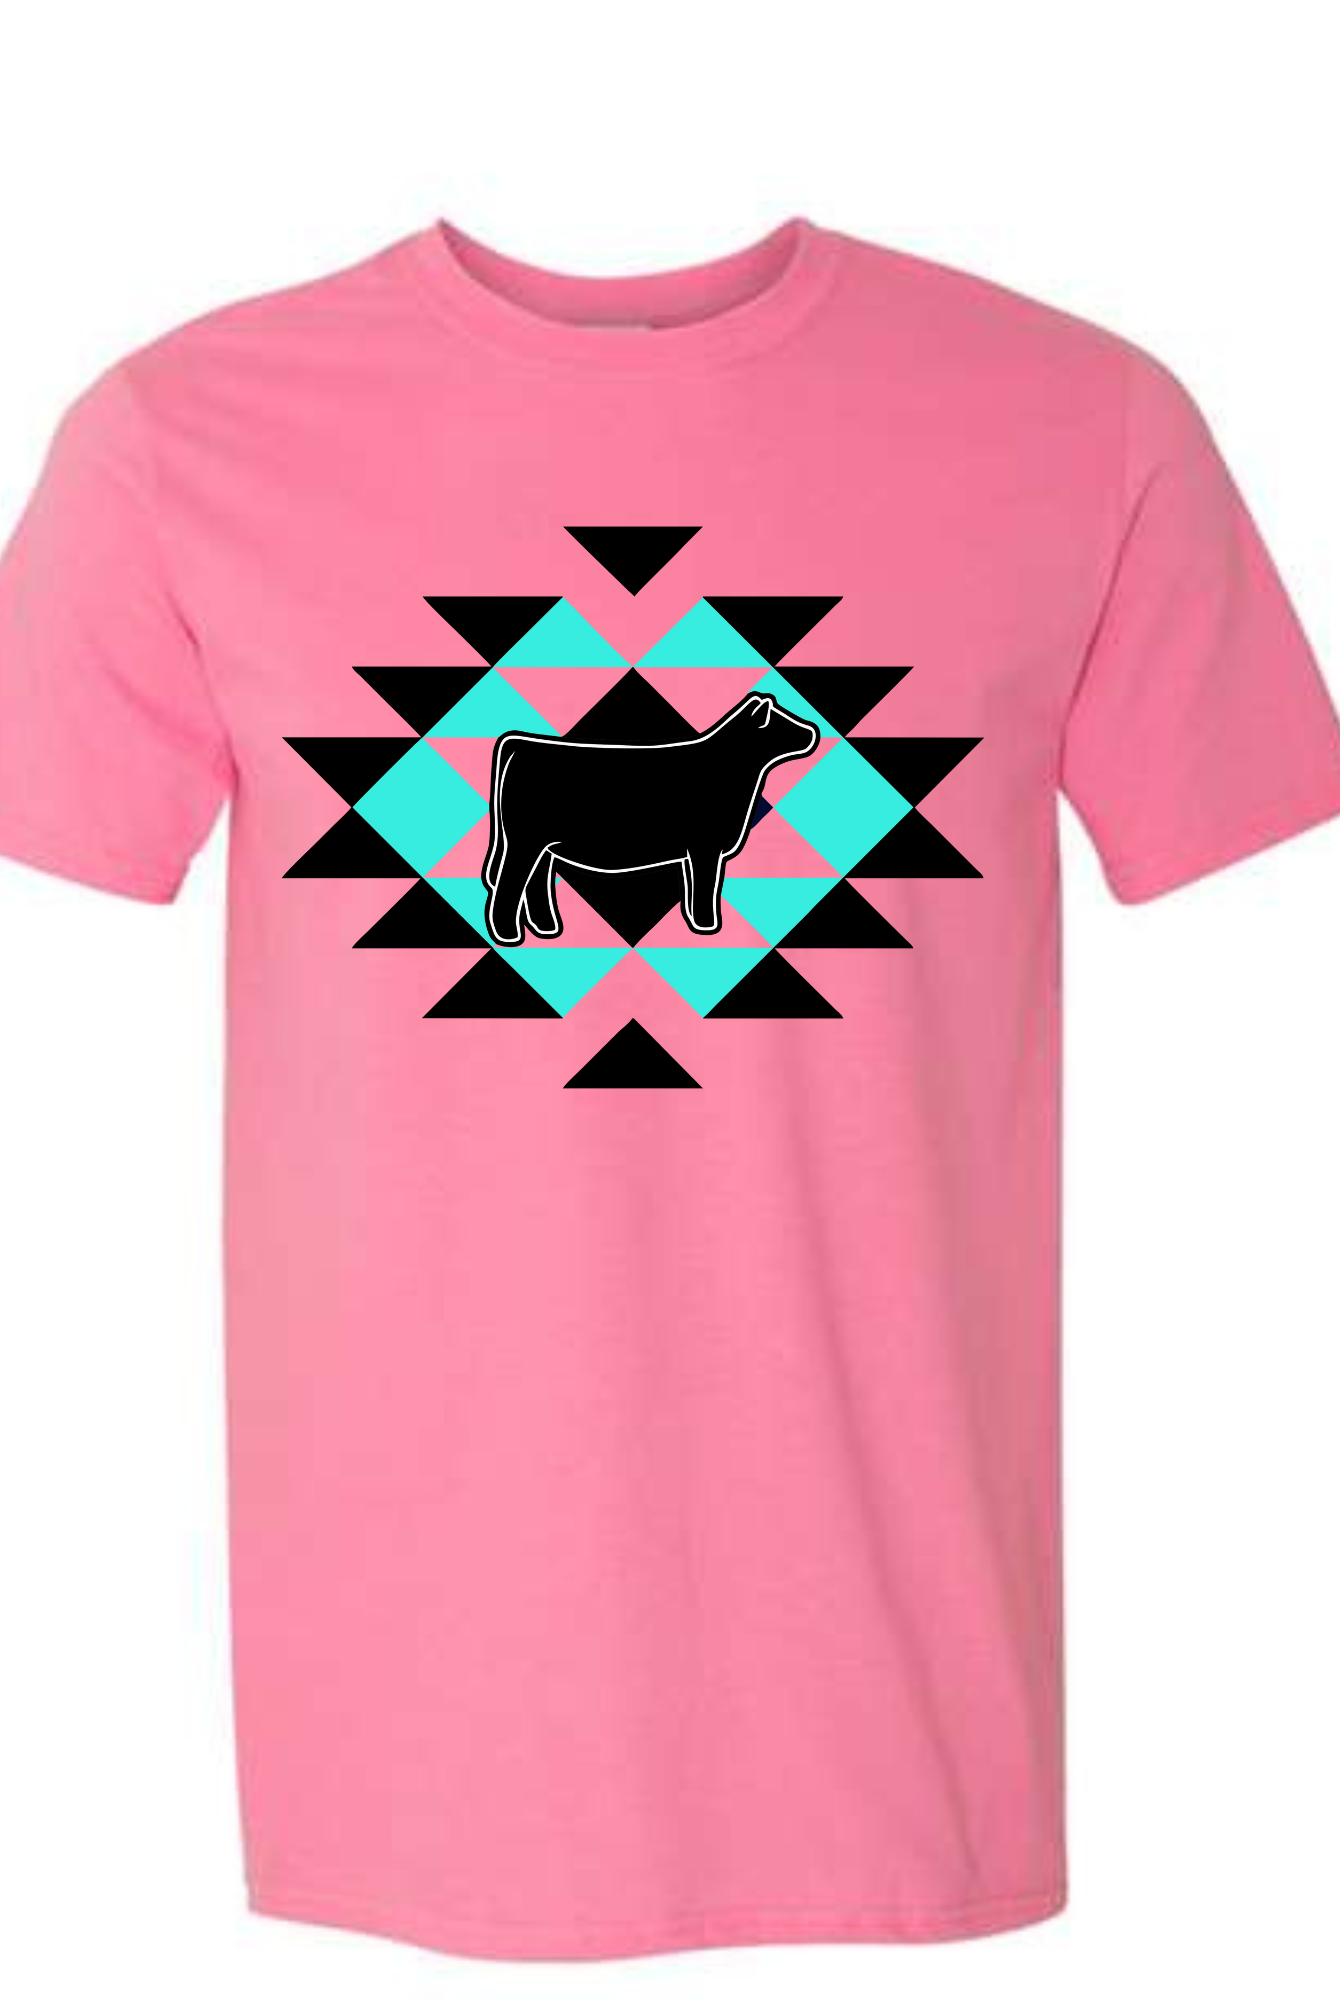 Pop Of Color Pick Your Passion Livestock Graphic Tee-Graphic Tees-Deadwood South Boutique & Company-Deadwood South Boutique, Women's Fashion Boutique in Henderson, TX